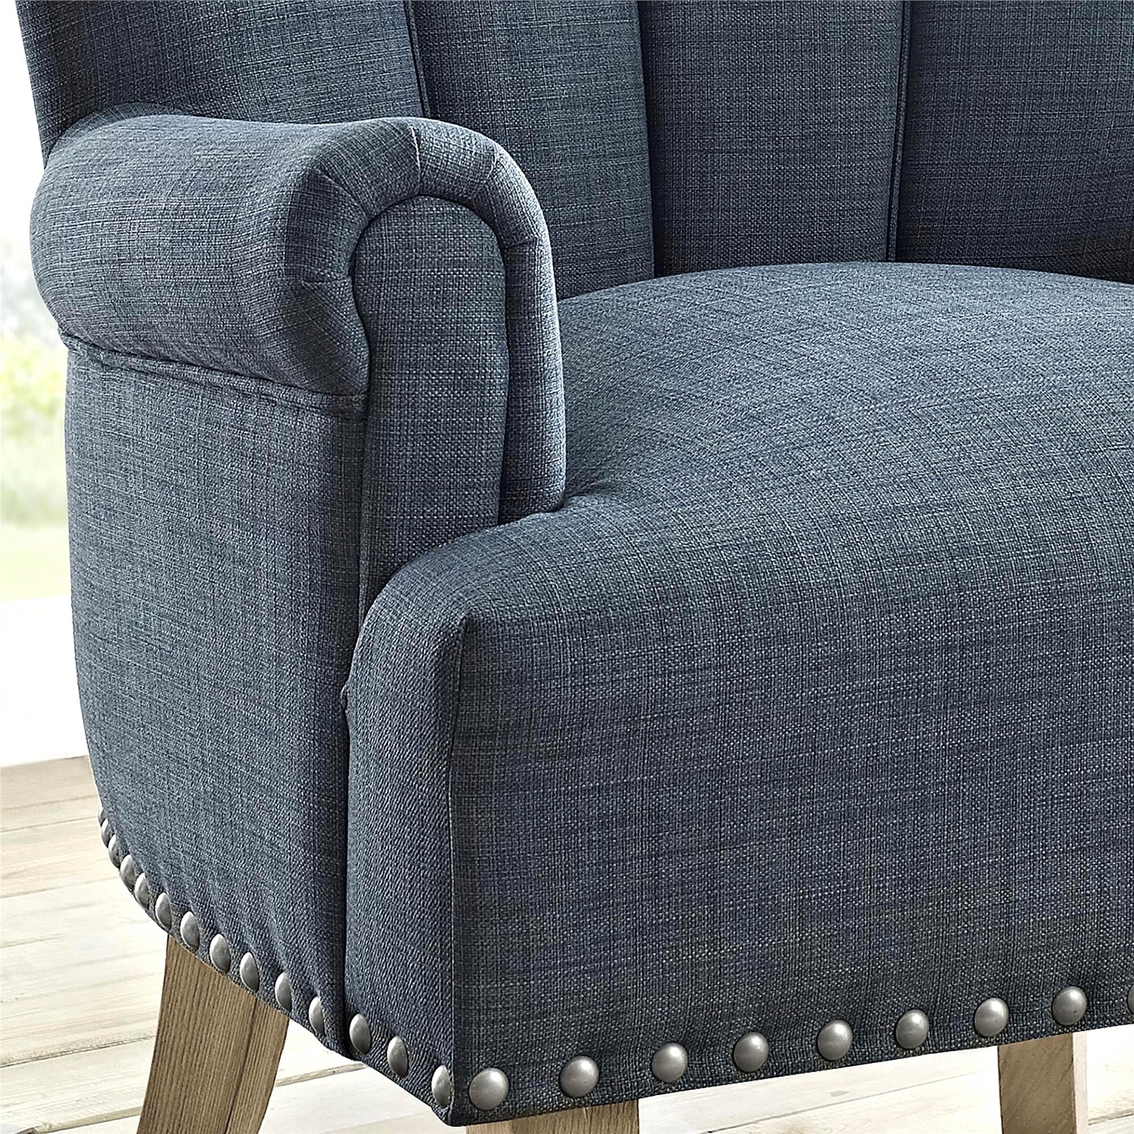 Dorel Living Accent Chair - Image 3 of 4